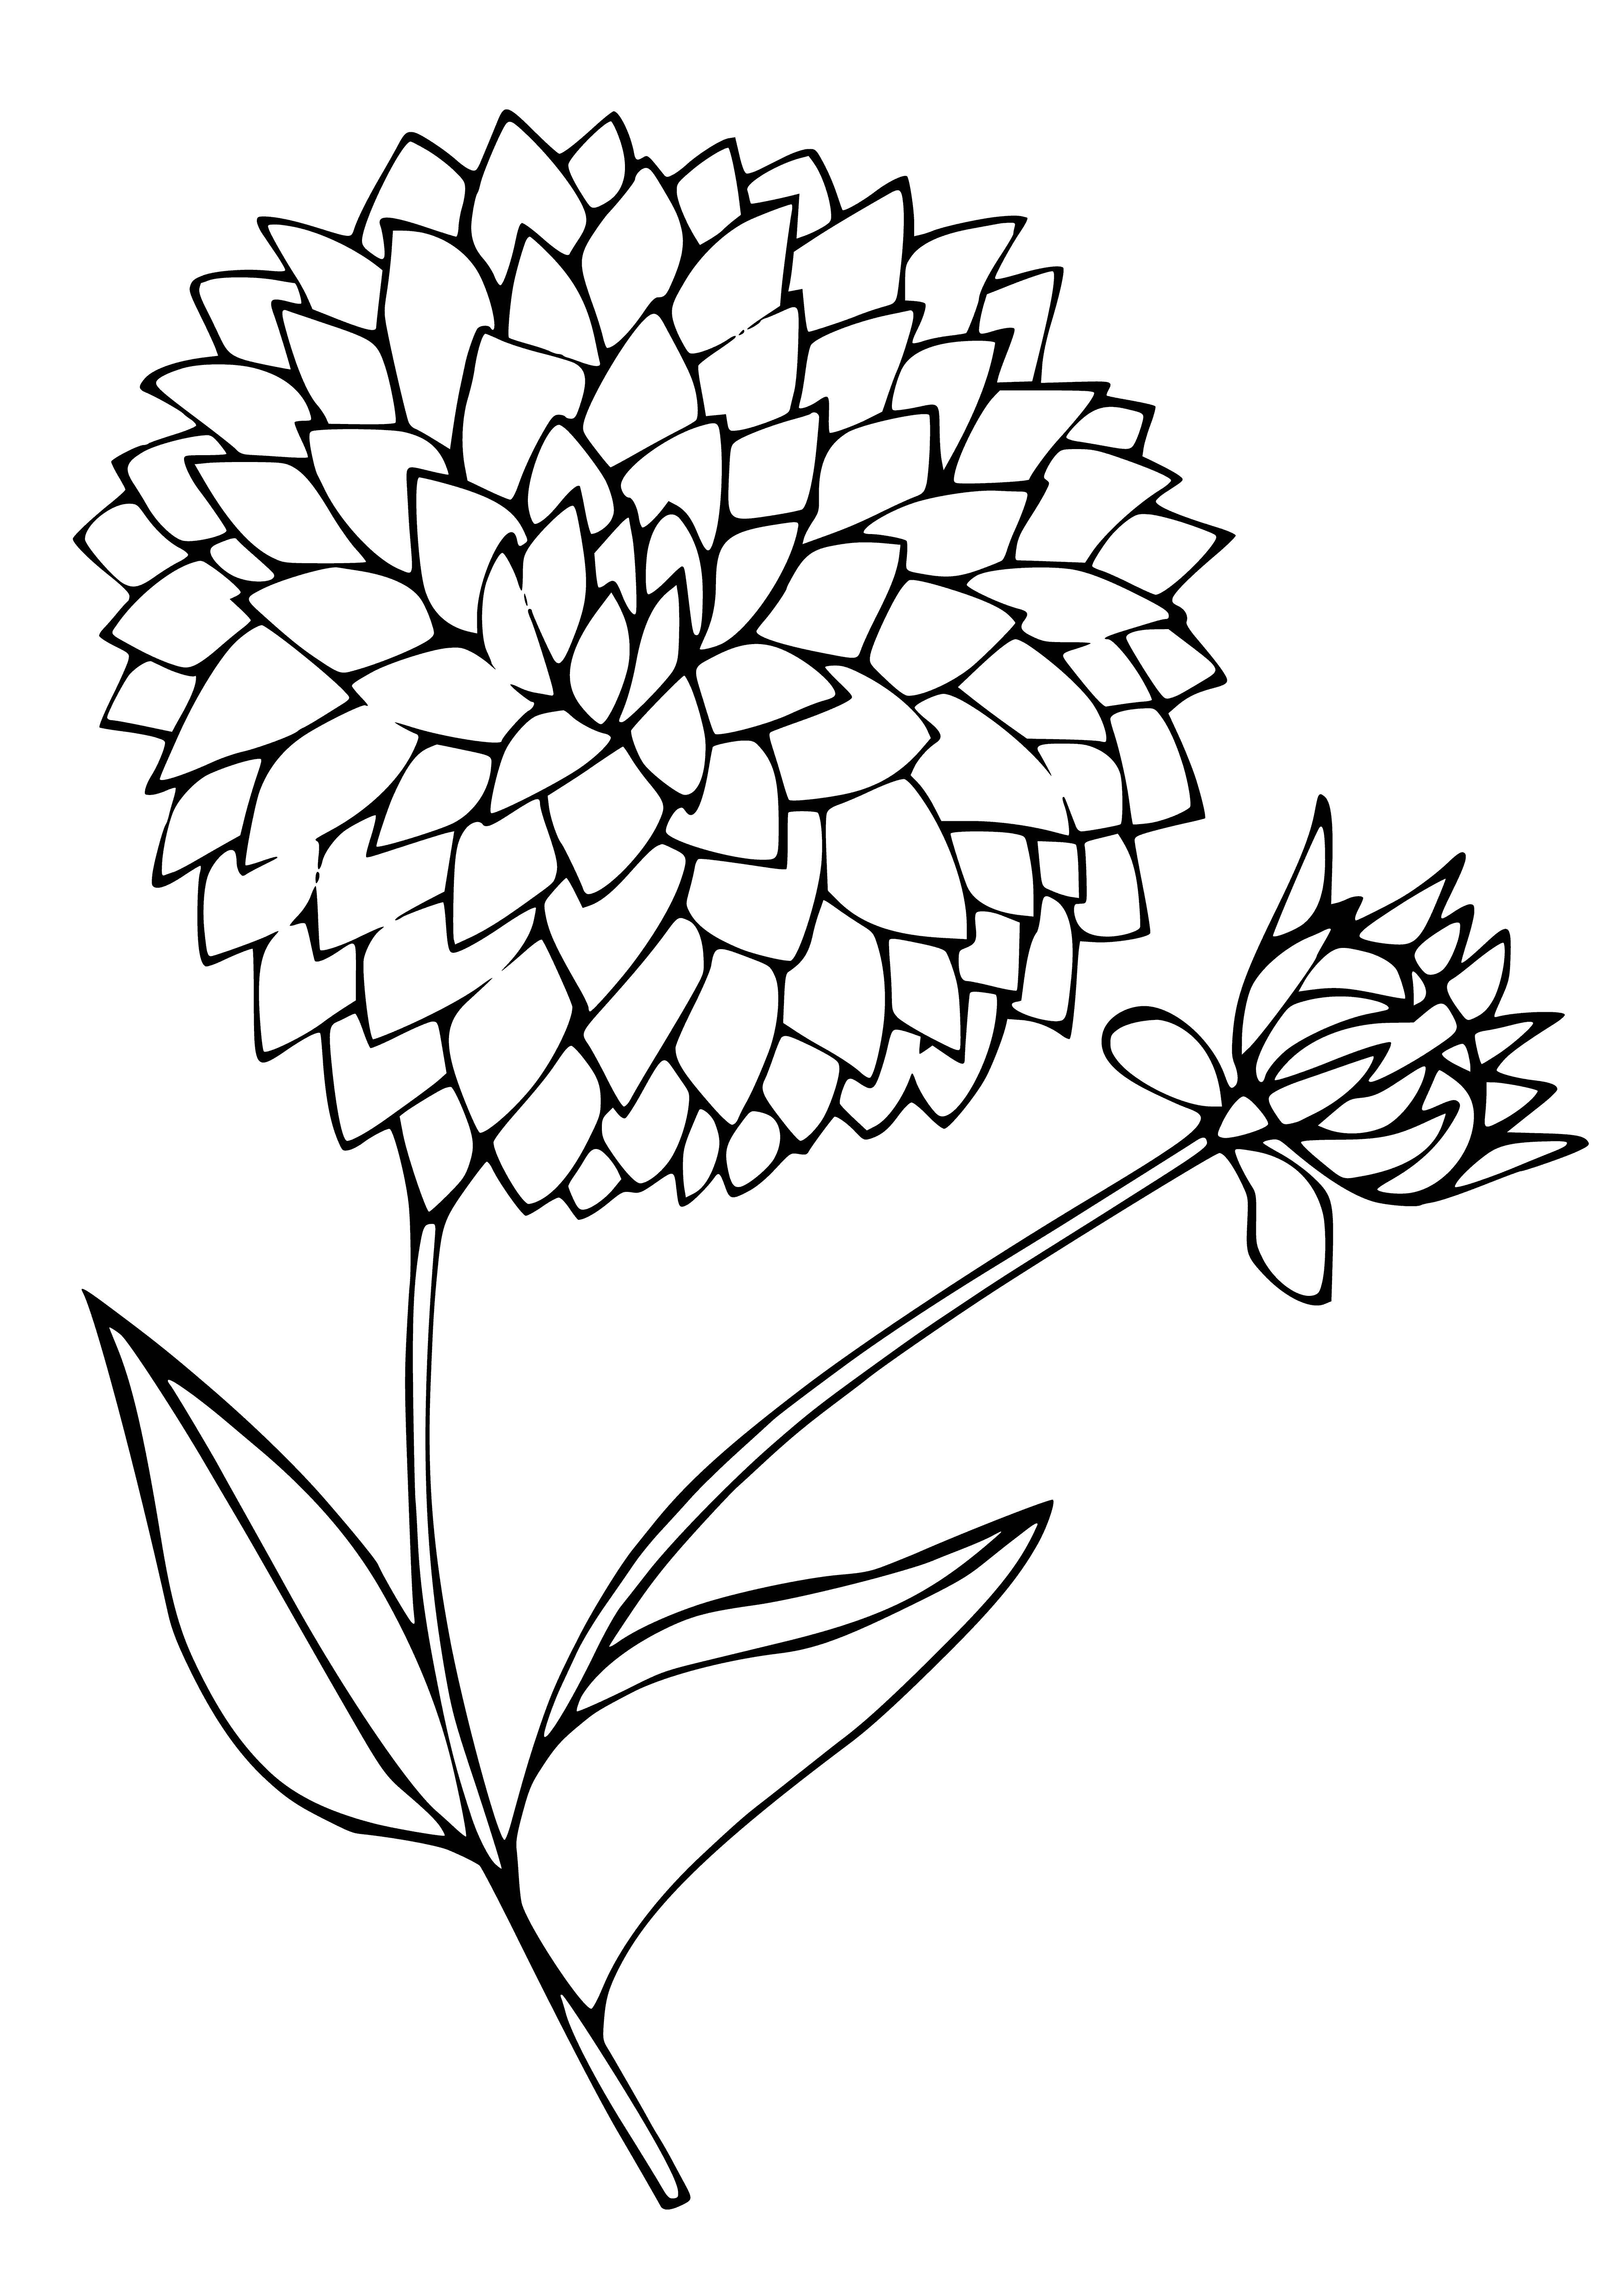 coloring page: A flower made up of small white petals with yellow tips, and a yellow center, surrounded by green leaves and a stems. #flower #coloringpage